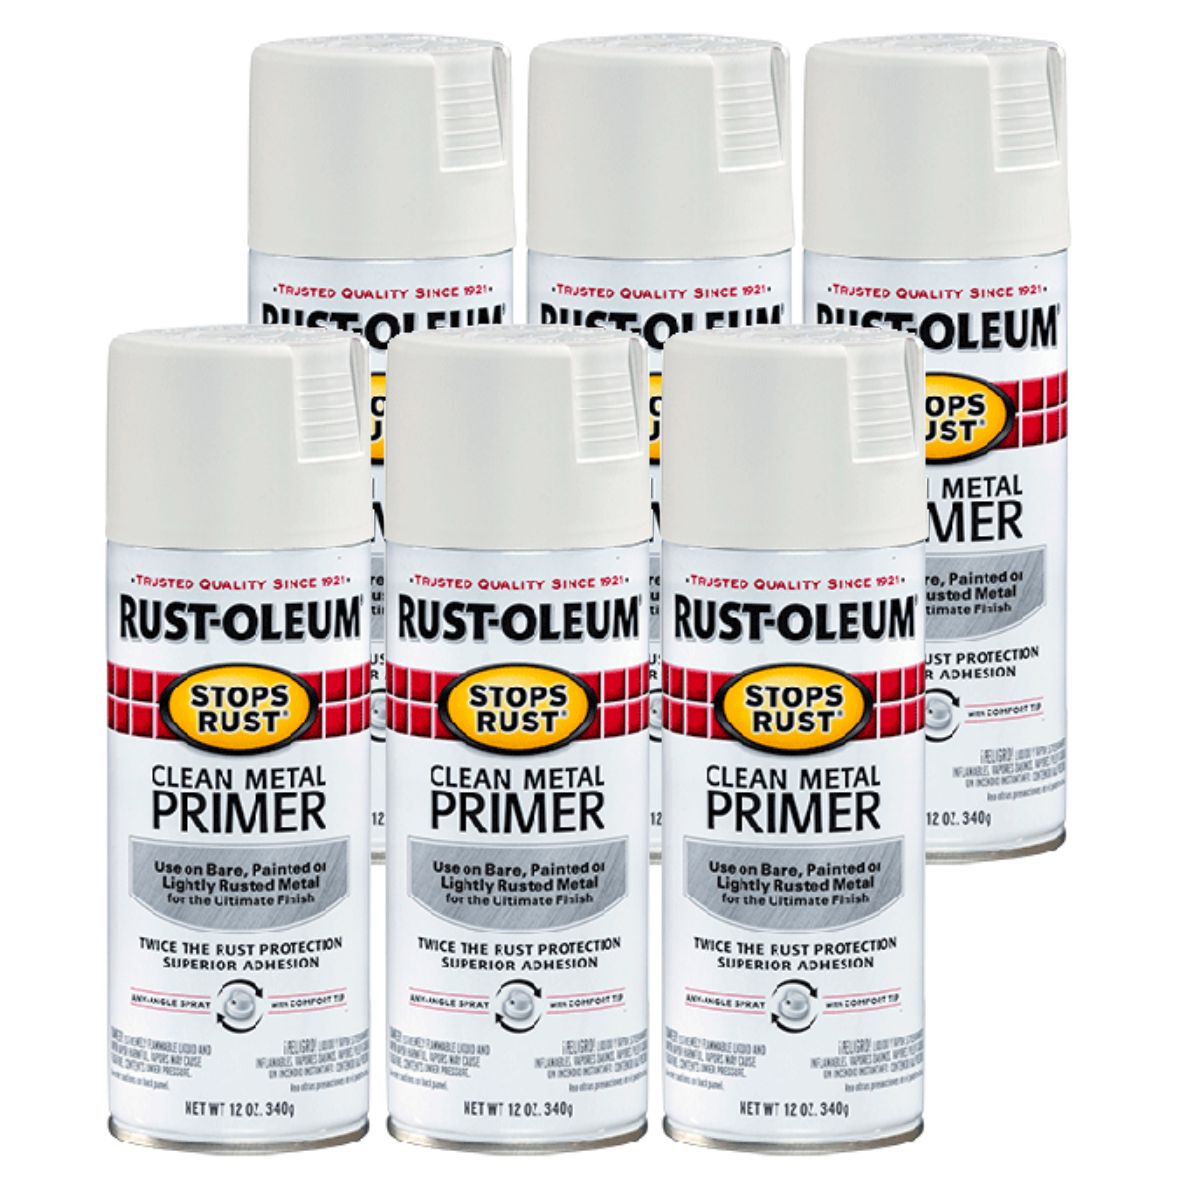 RUSTOLEUM 7780830 STOPS RUST CLEAN METAL PRIMER (6 Cans) - South East Clearance Centre